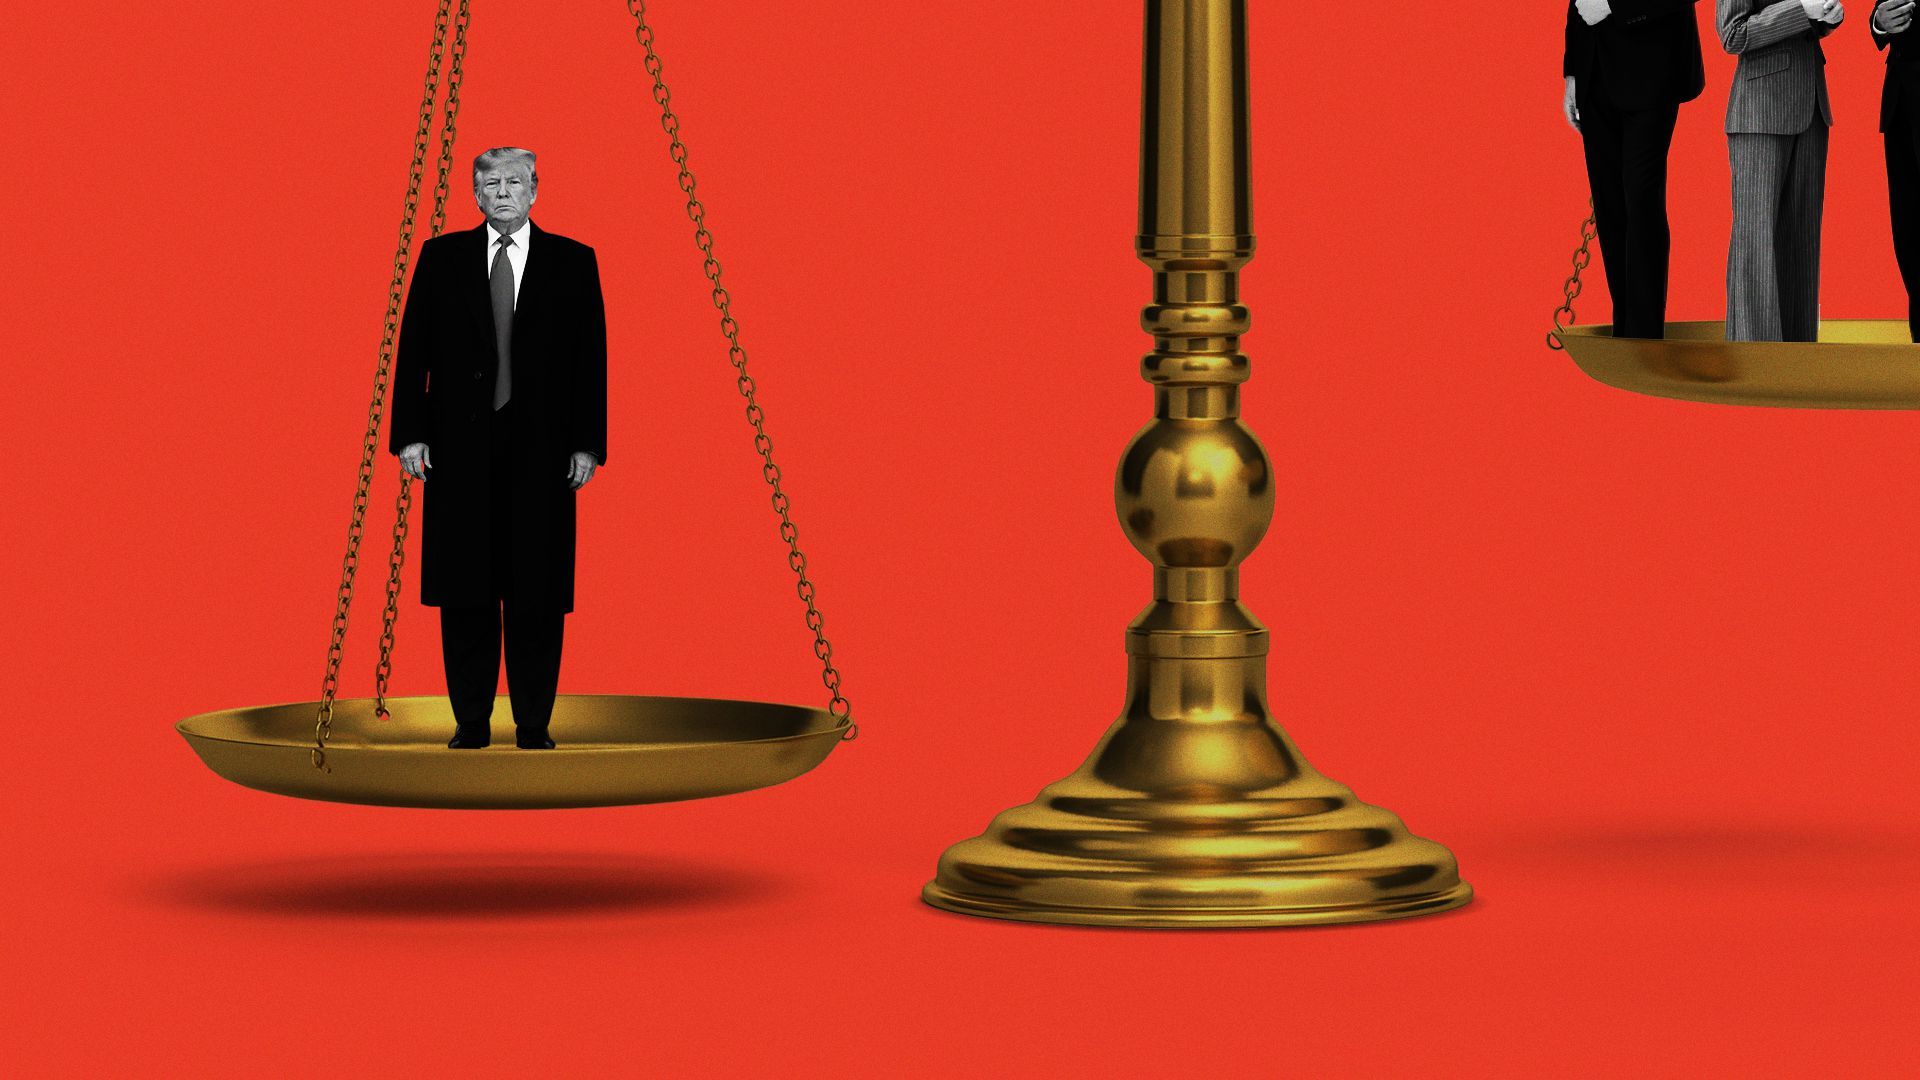 Illustration of Donald Trump weighing down the scales of justice, with a group of lawyers on the other scale.